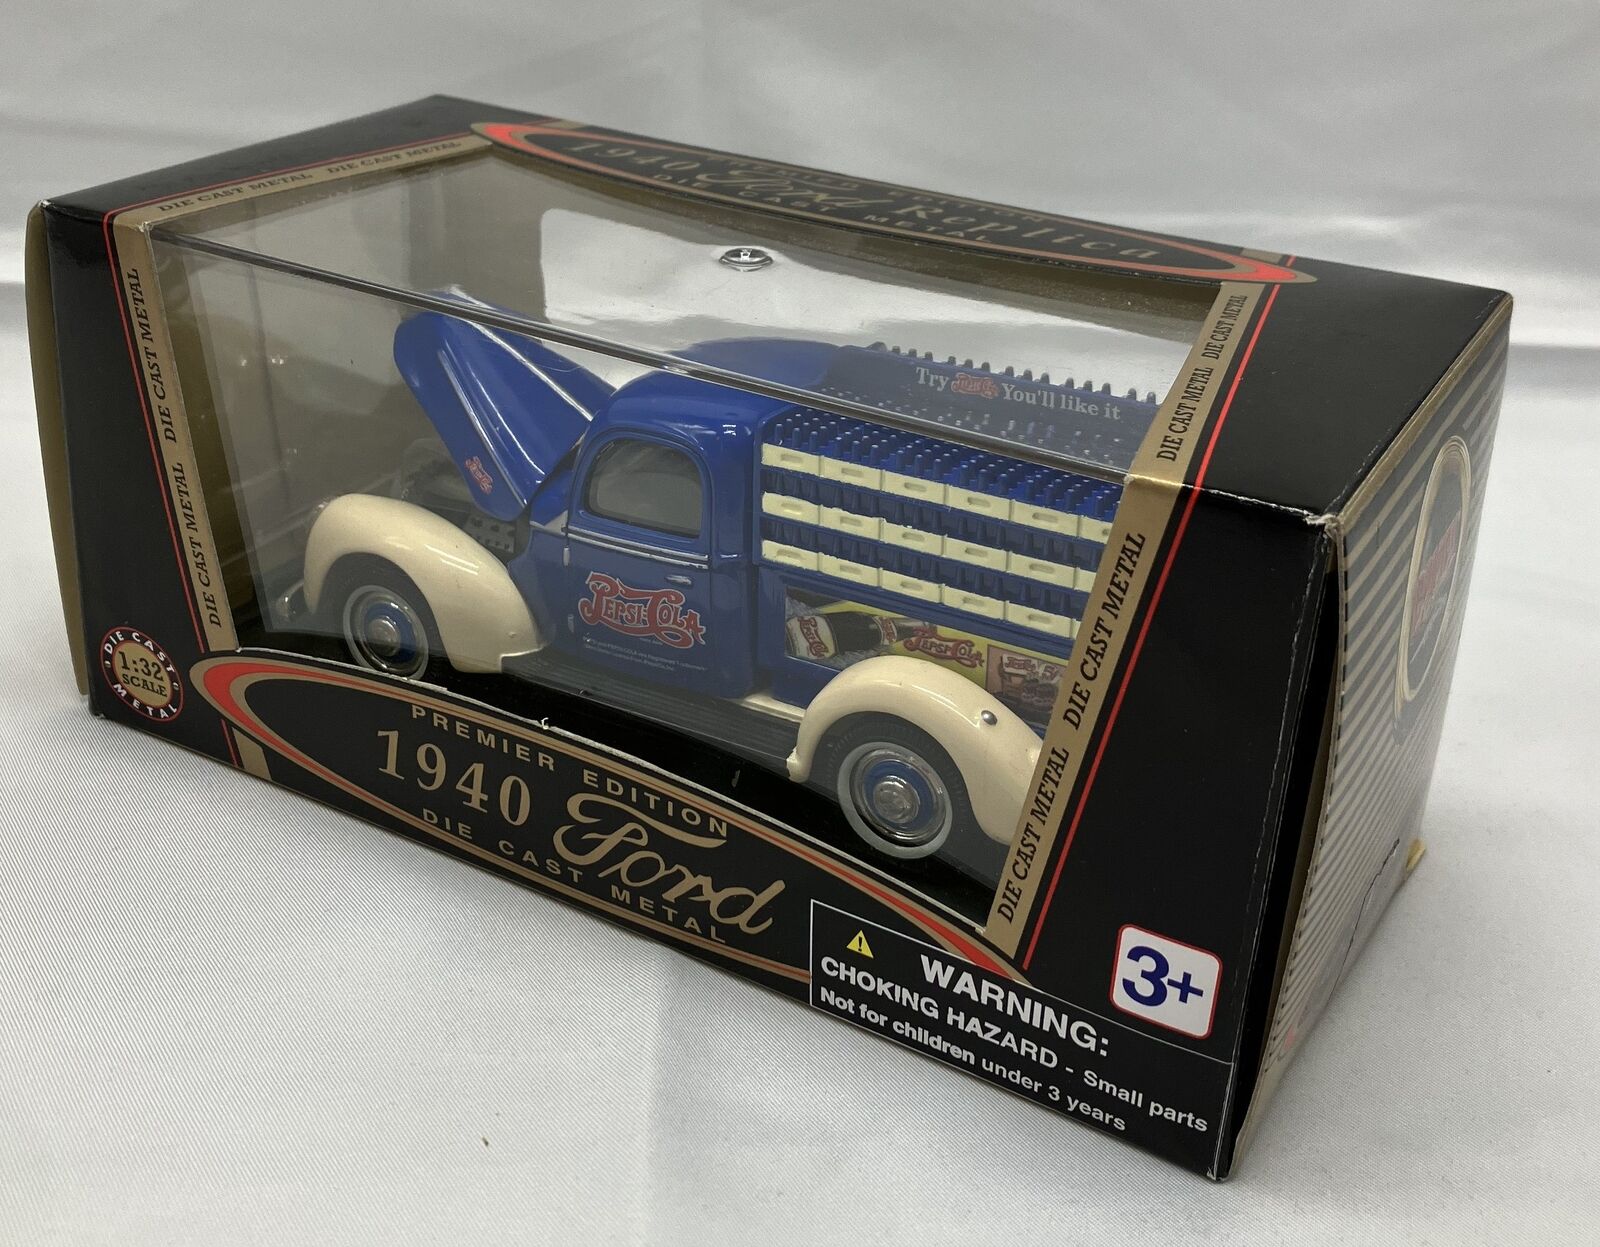 1940 Ford Pepsi Cola Delivery Truck by Golden Wheel